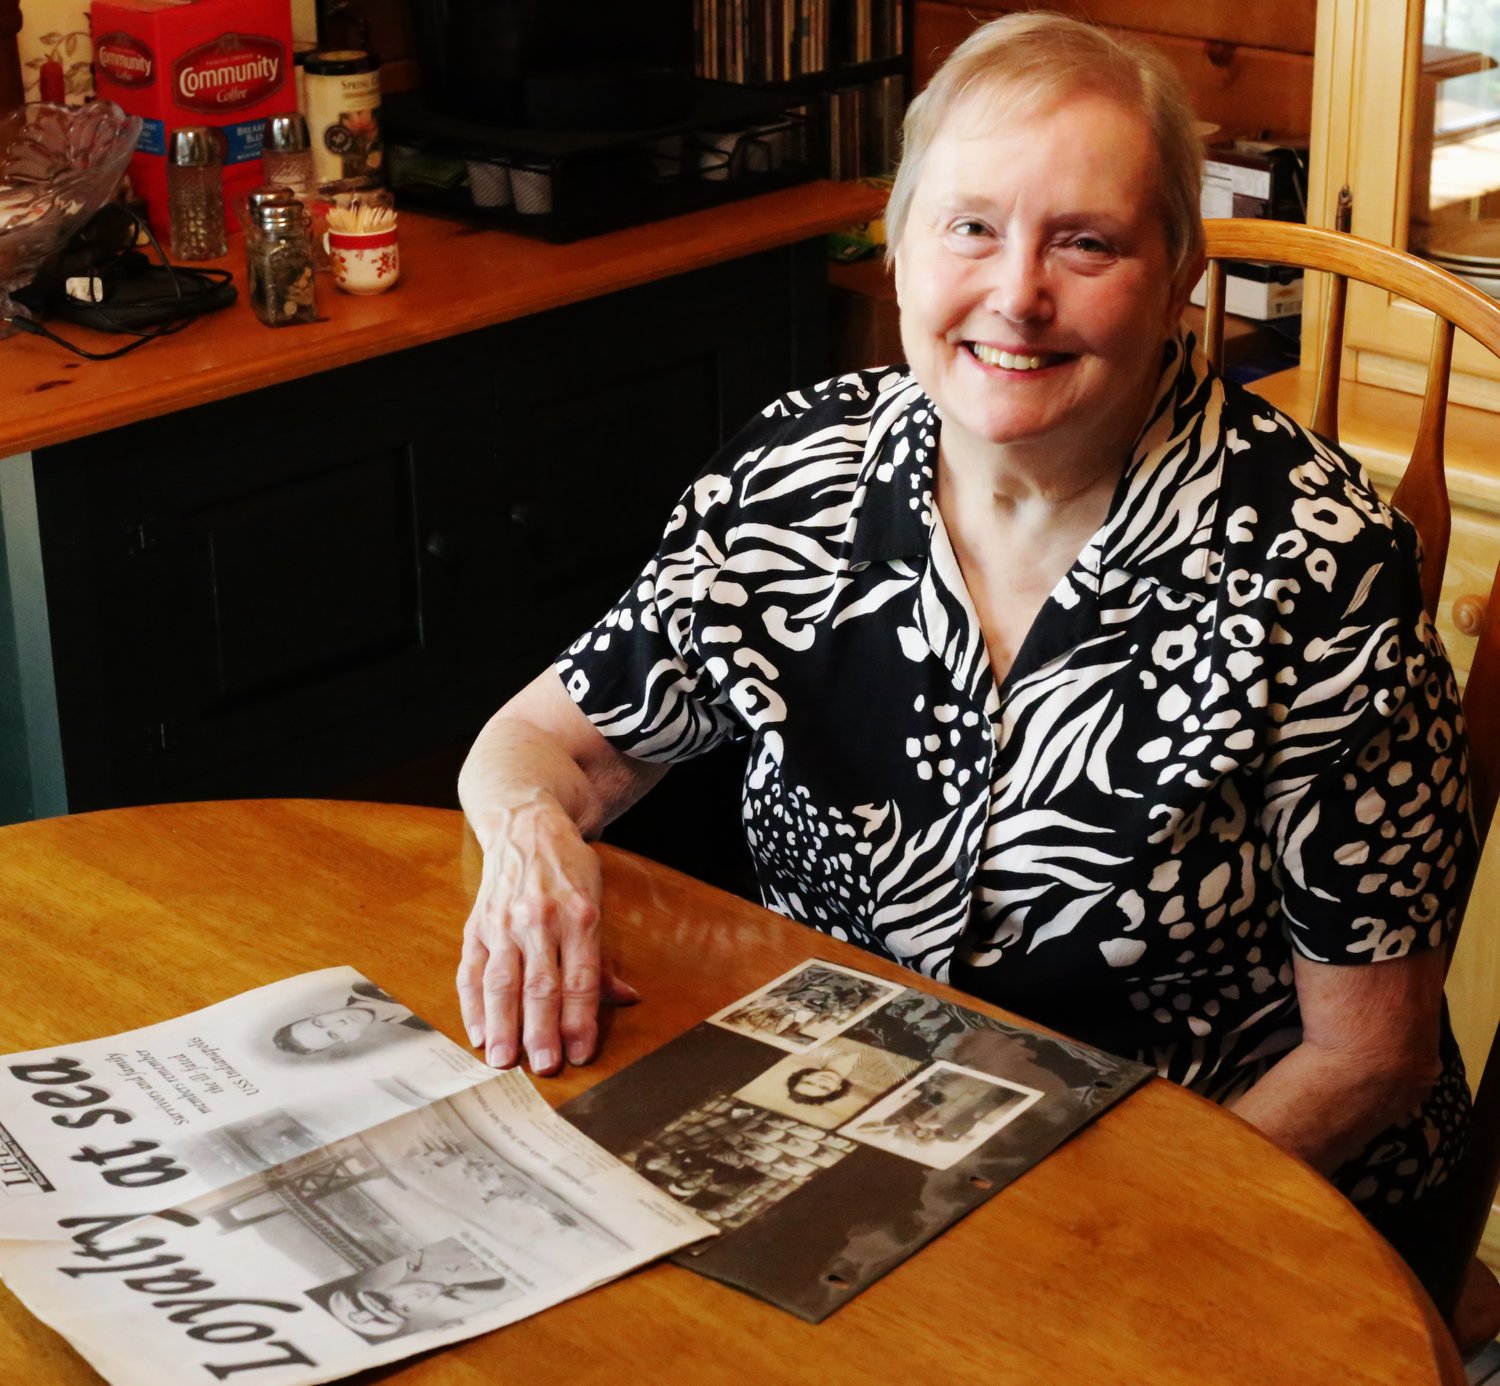 Lebow’s daughter, Mineola resident Sonja Rosson, shares some memorabilia about her family’s story. (Monitor photo by John Arbter)